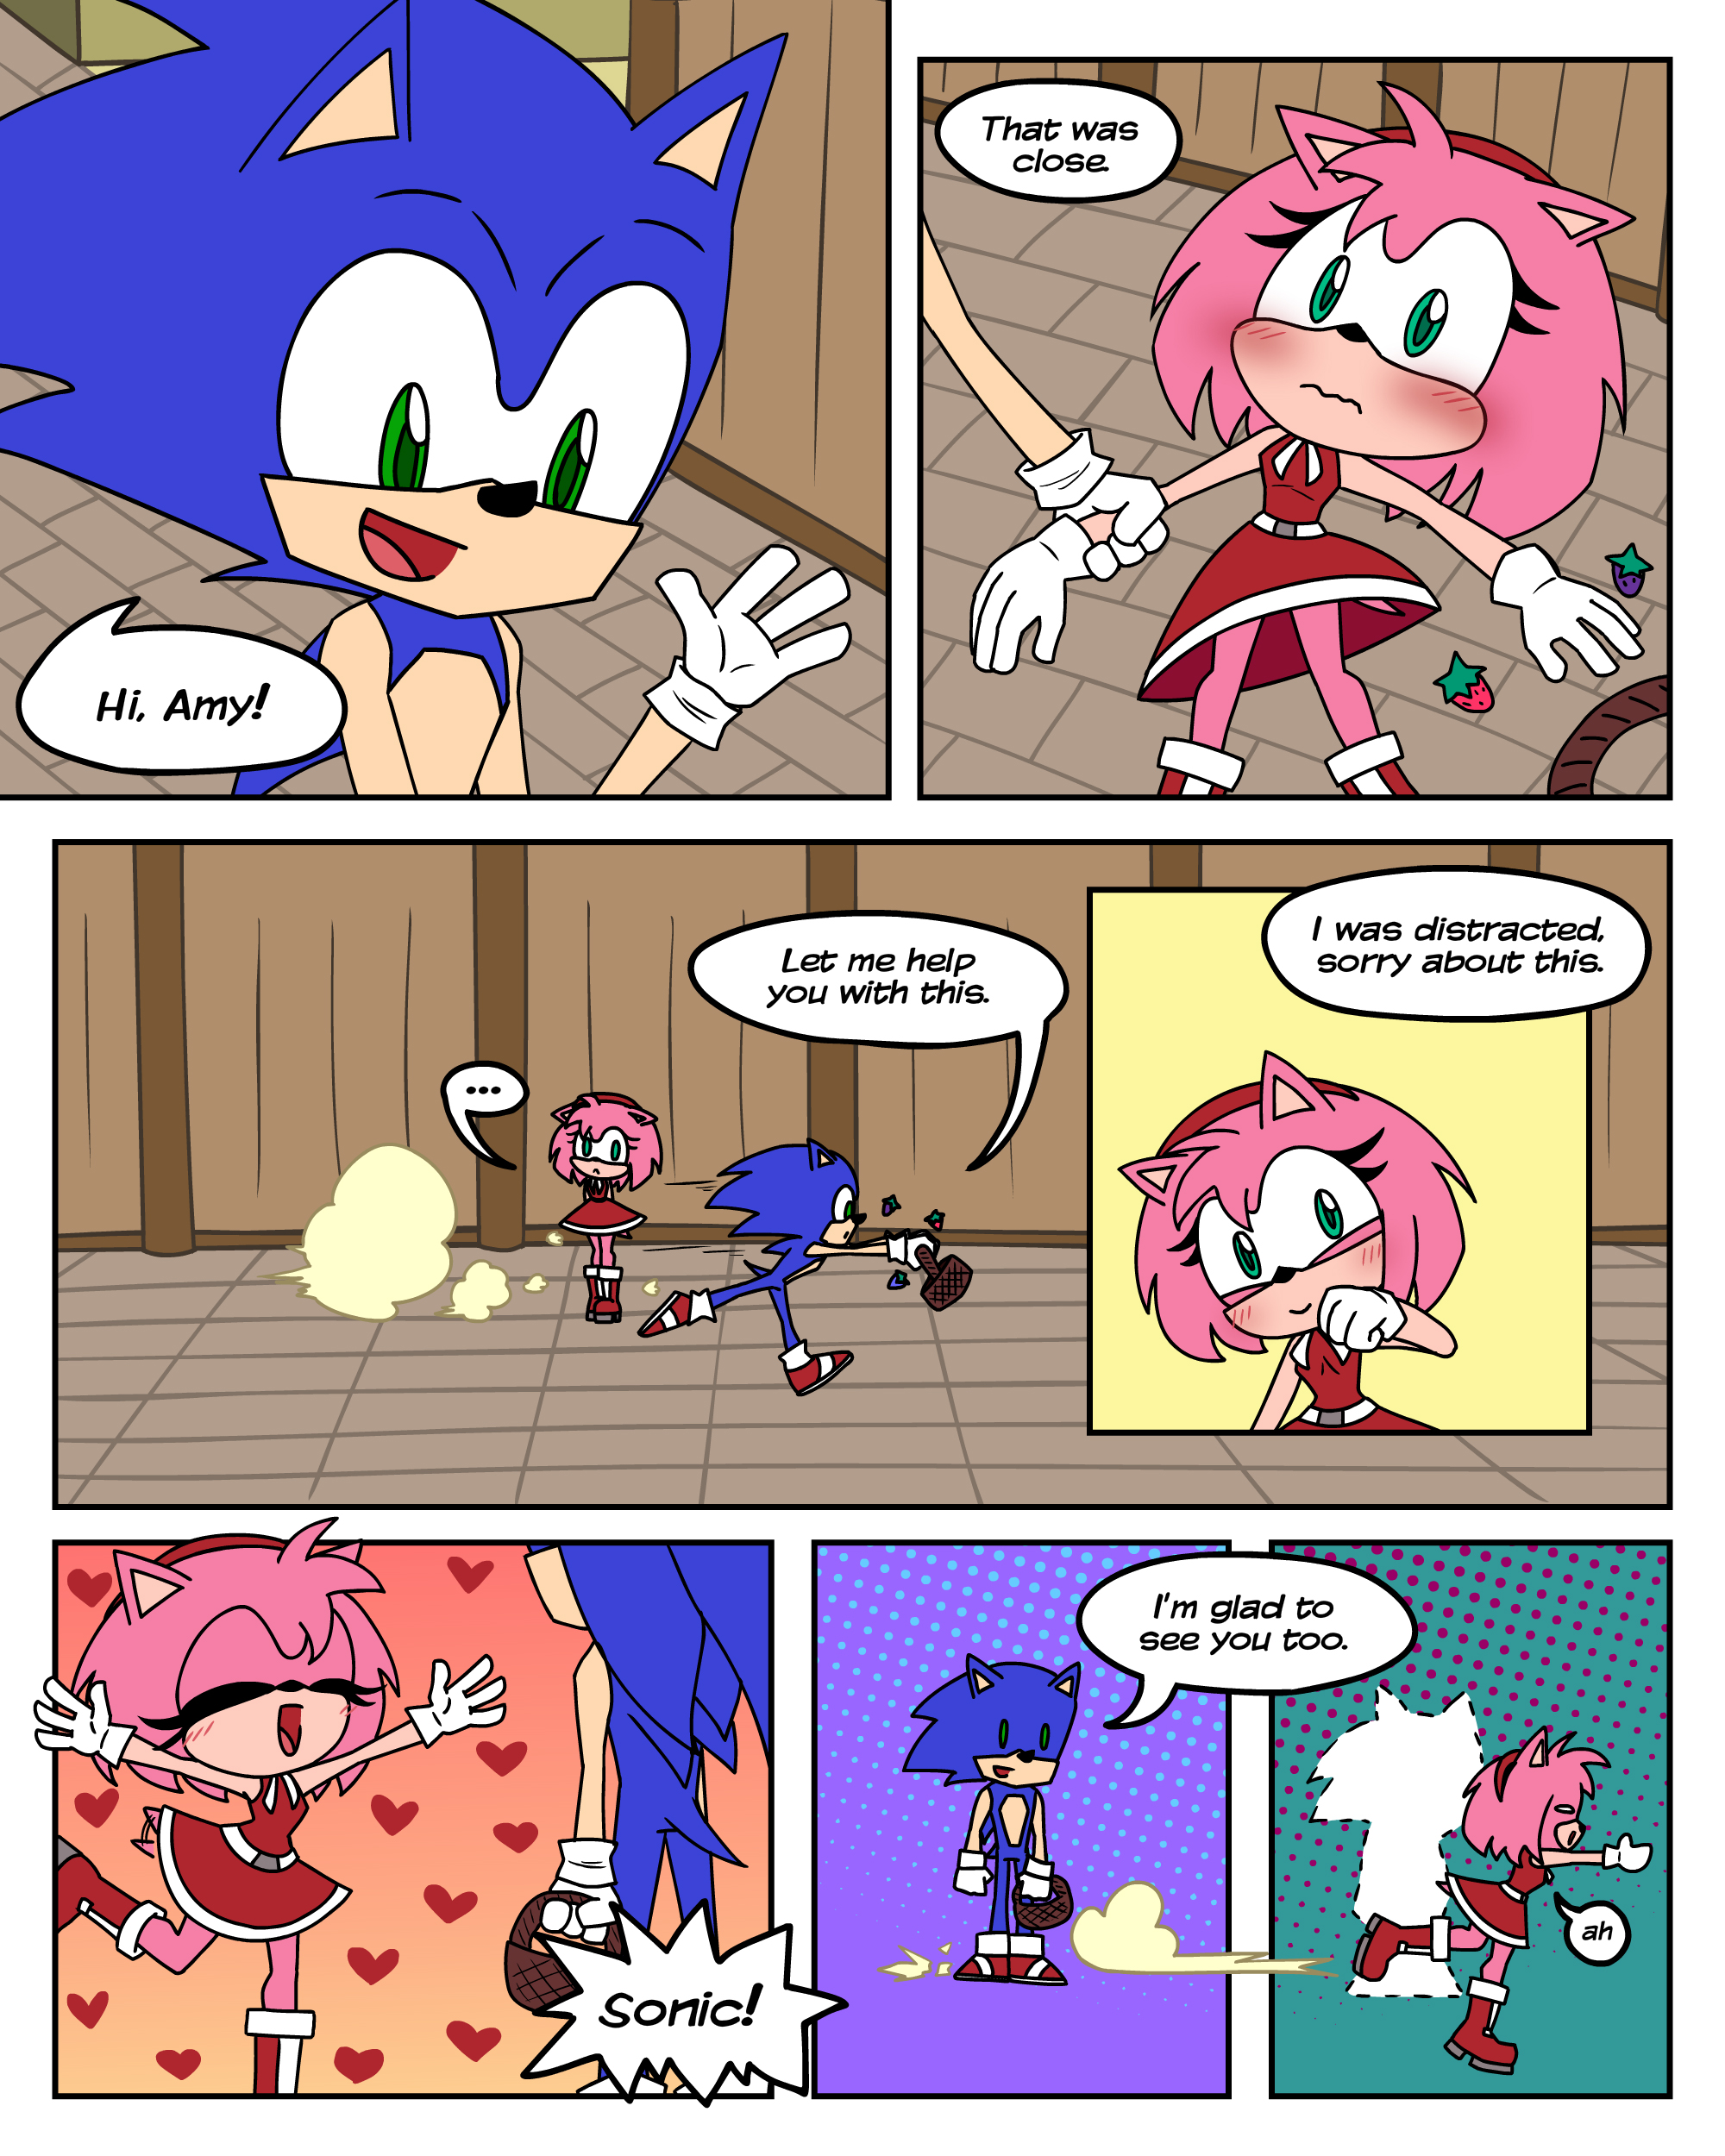 Sonamy Comic - Page 03 by RojiToons on DeviantArt